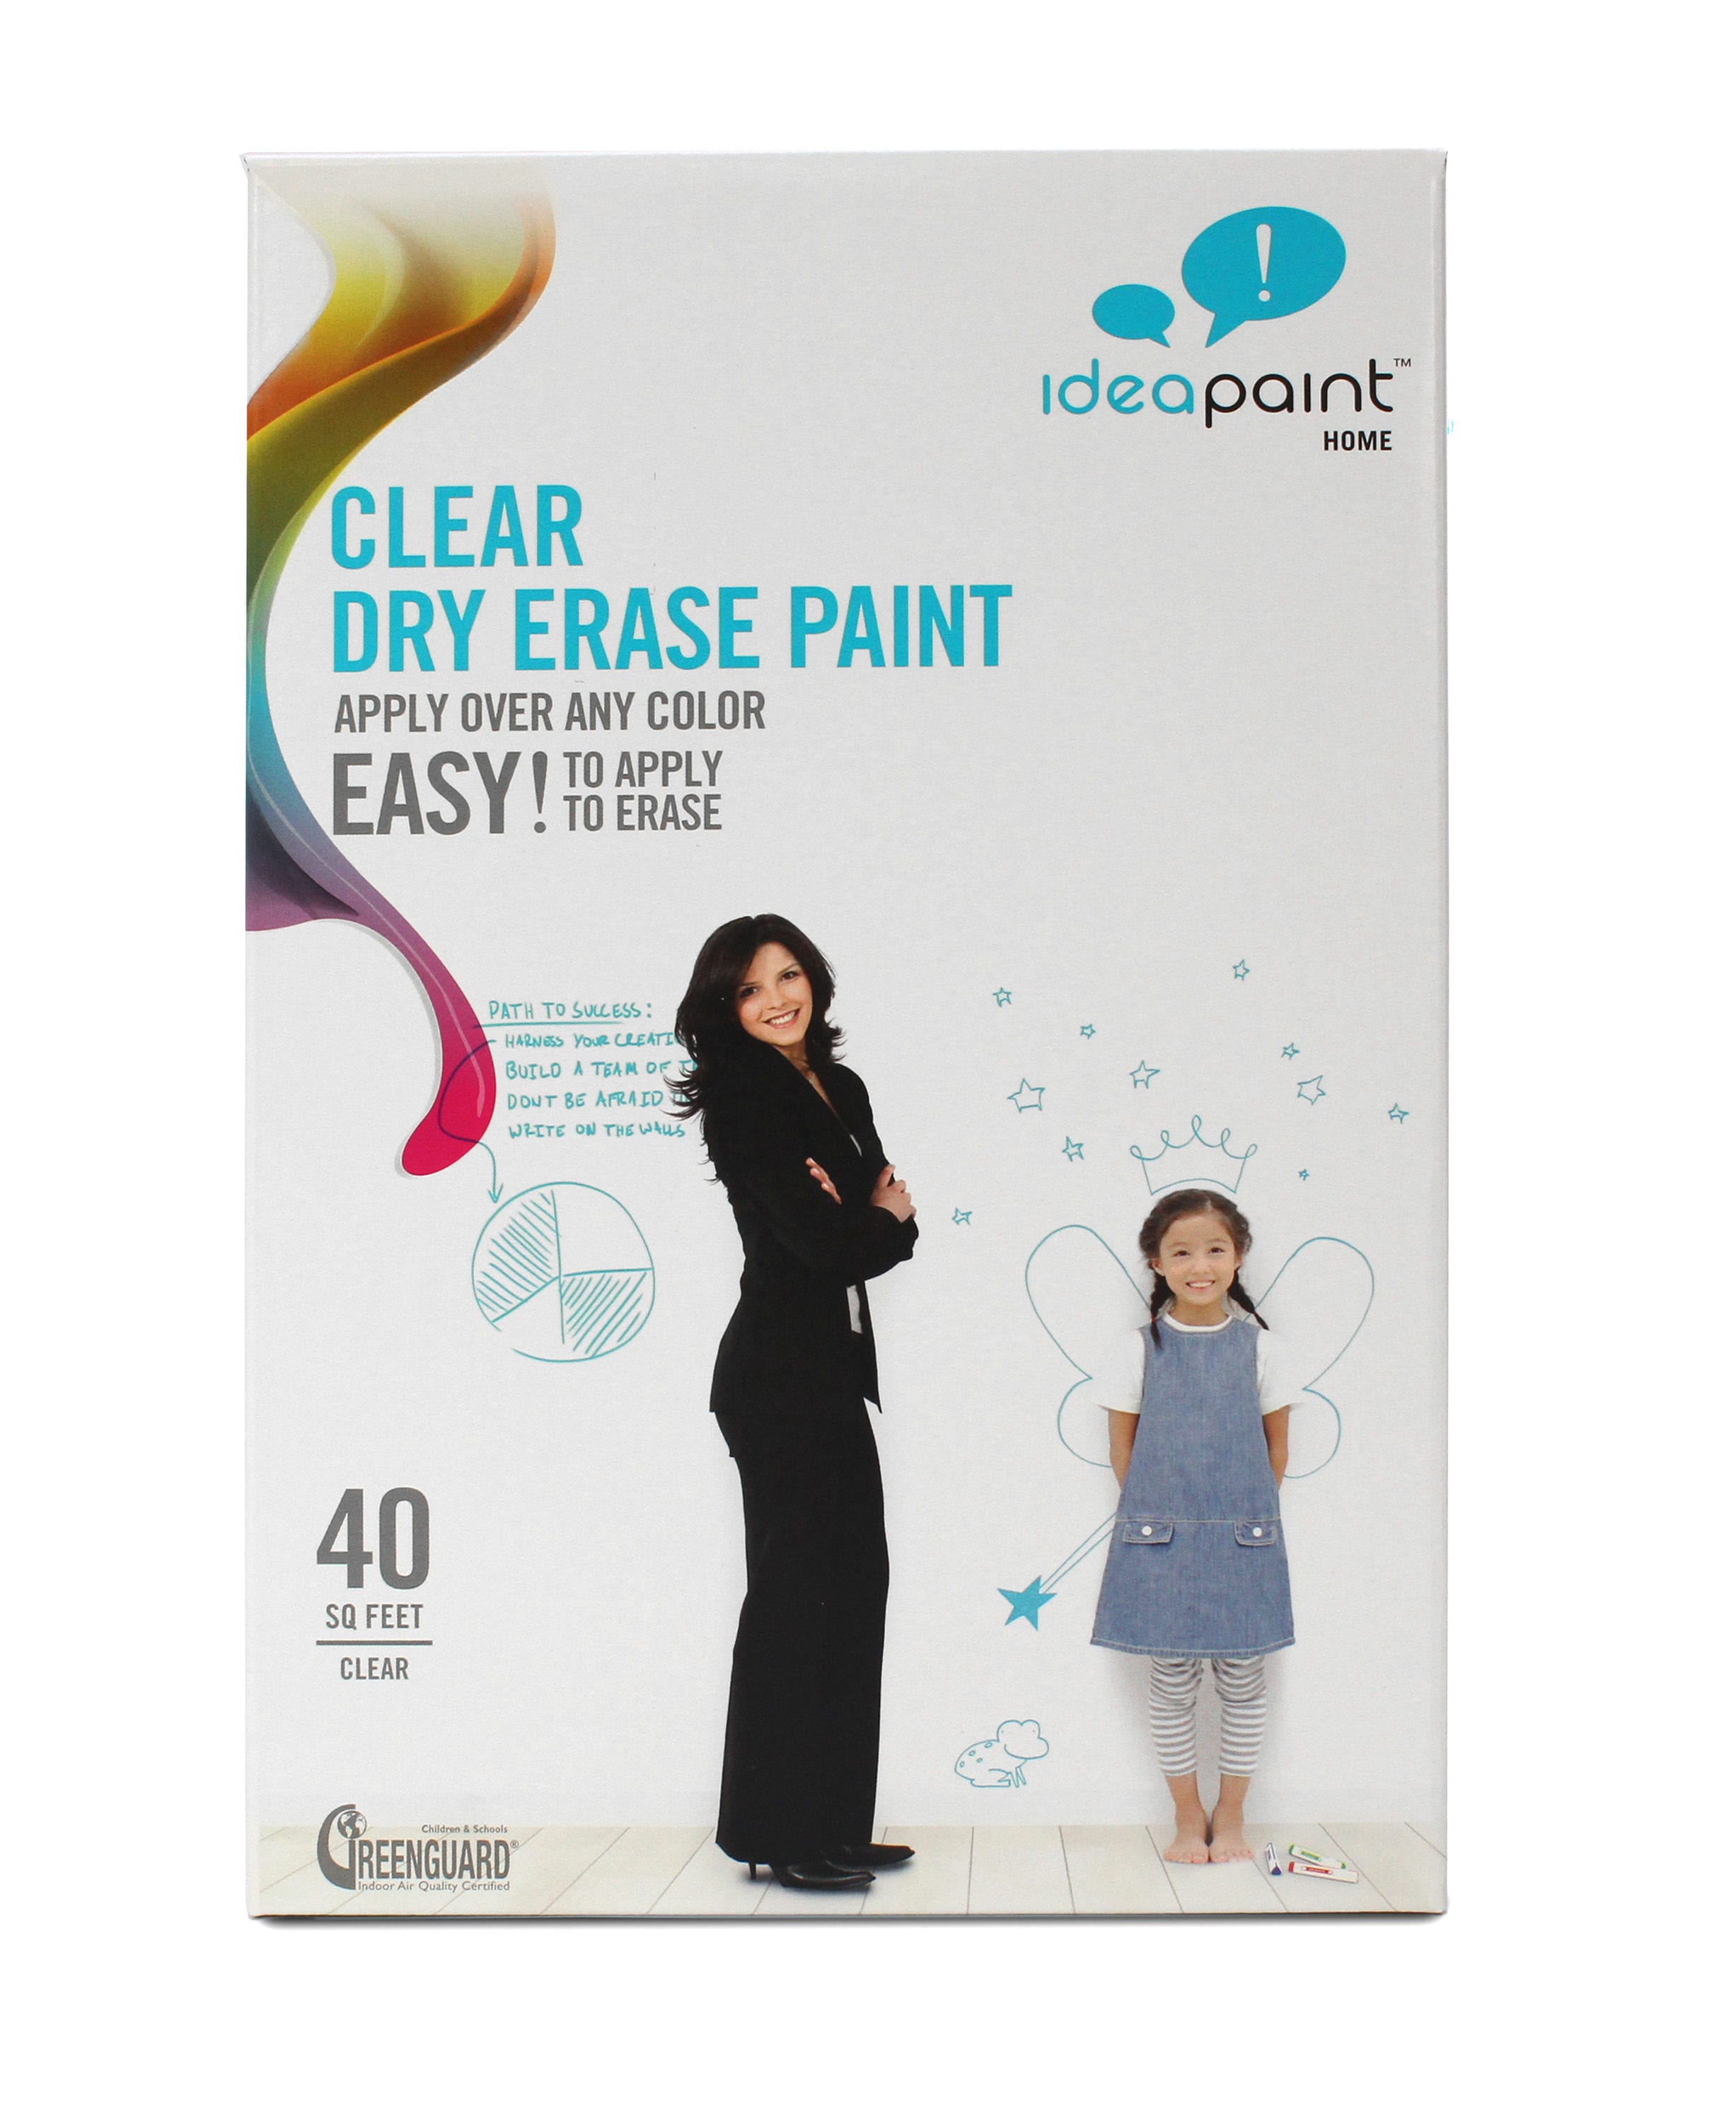 IdeaPaint Clear Gloss Dry Erase Paint 40 Sq. Ft (1-pint) at